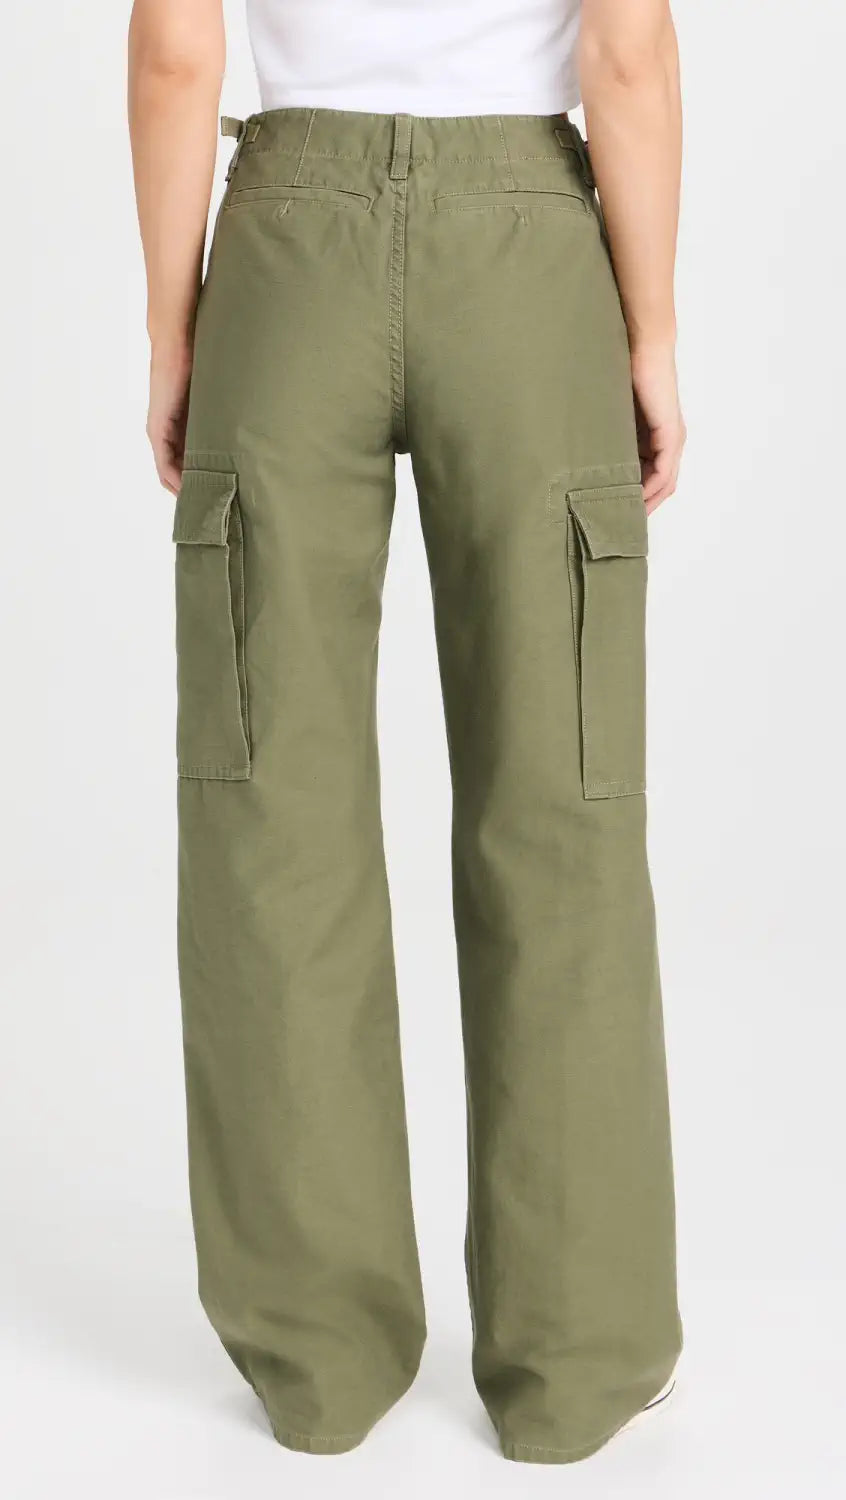 RE/DONE Military Trouser